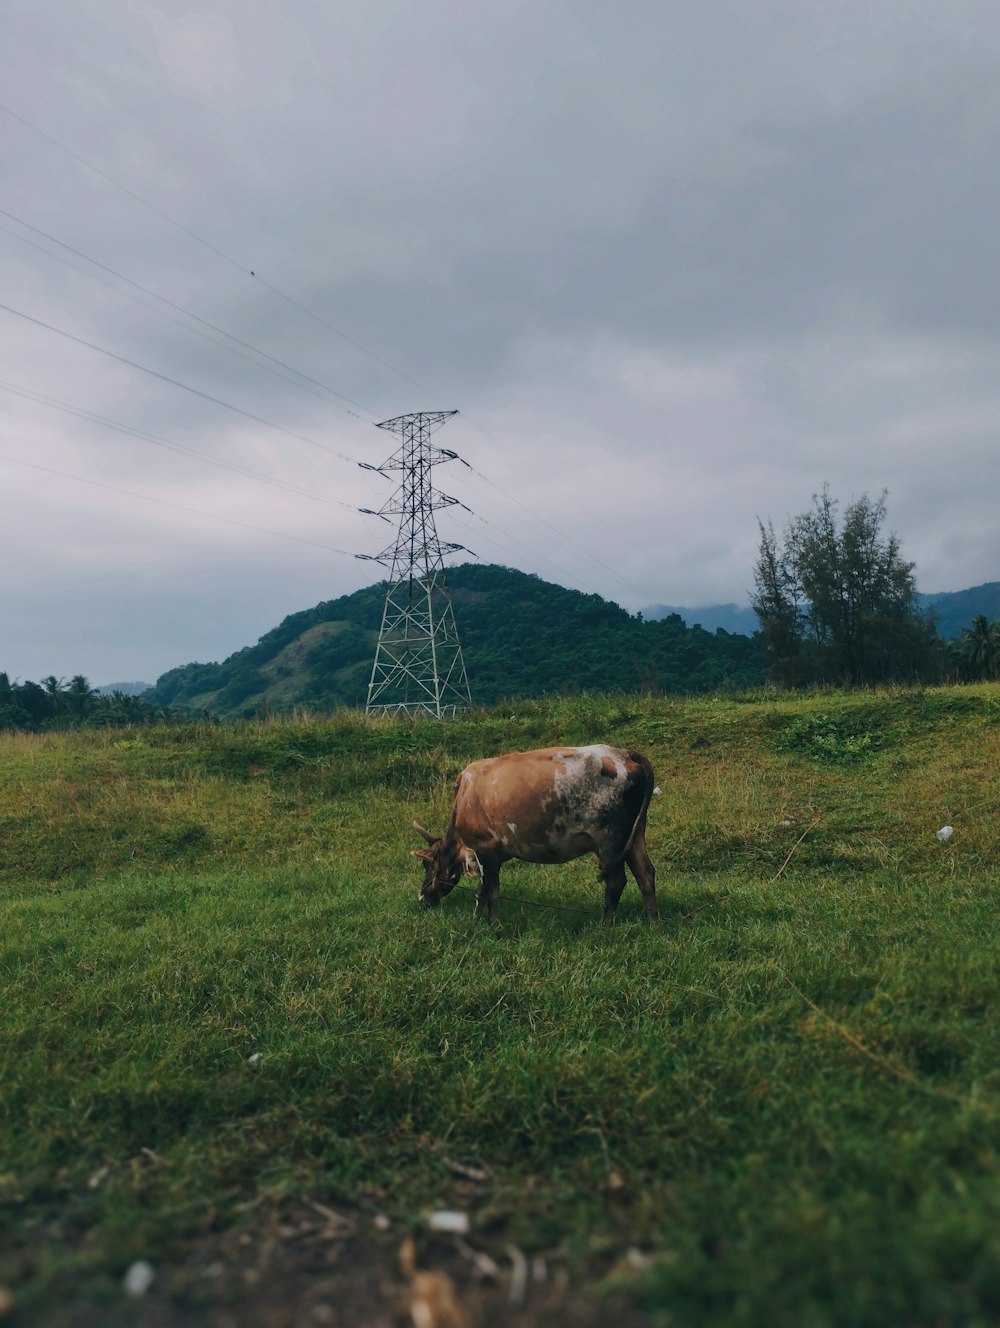 a cow grazing in a field with power lines in the background